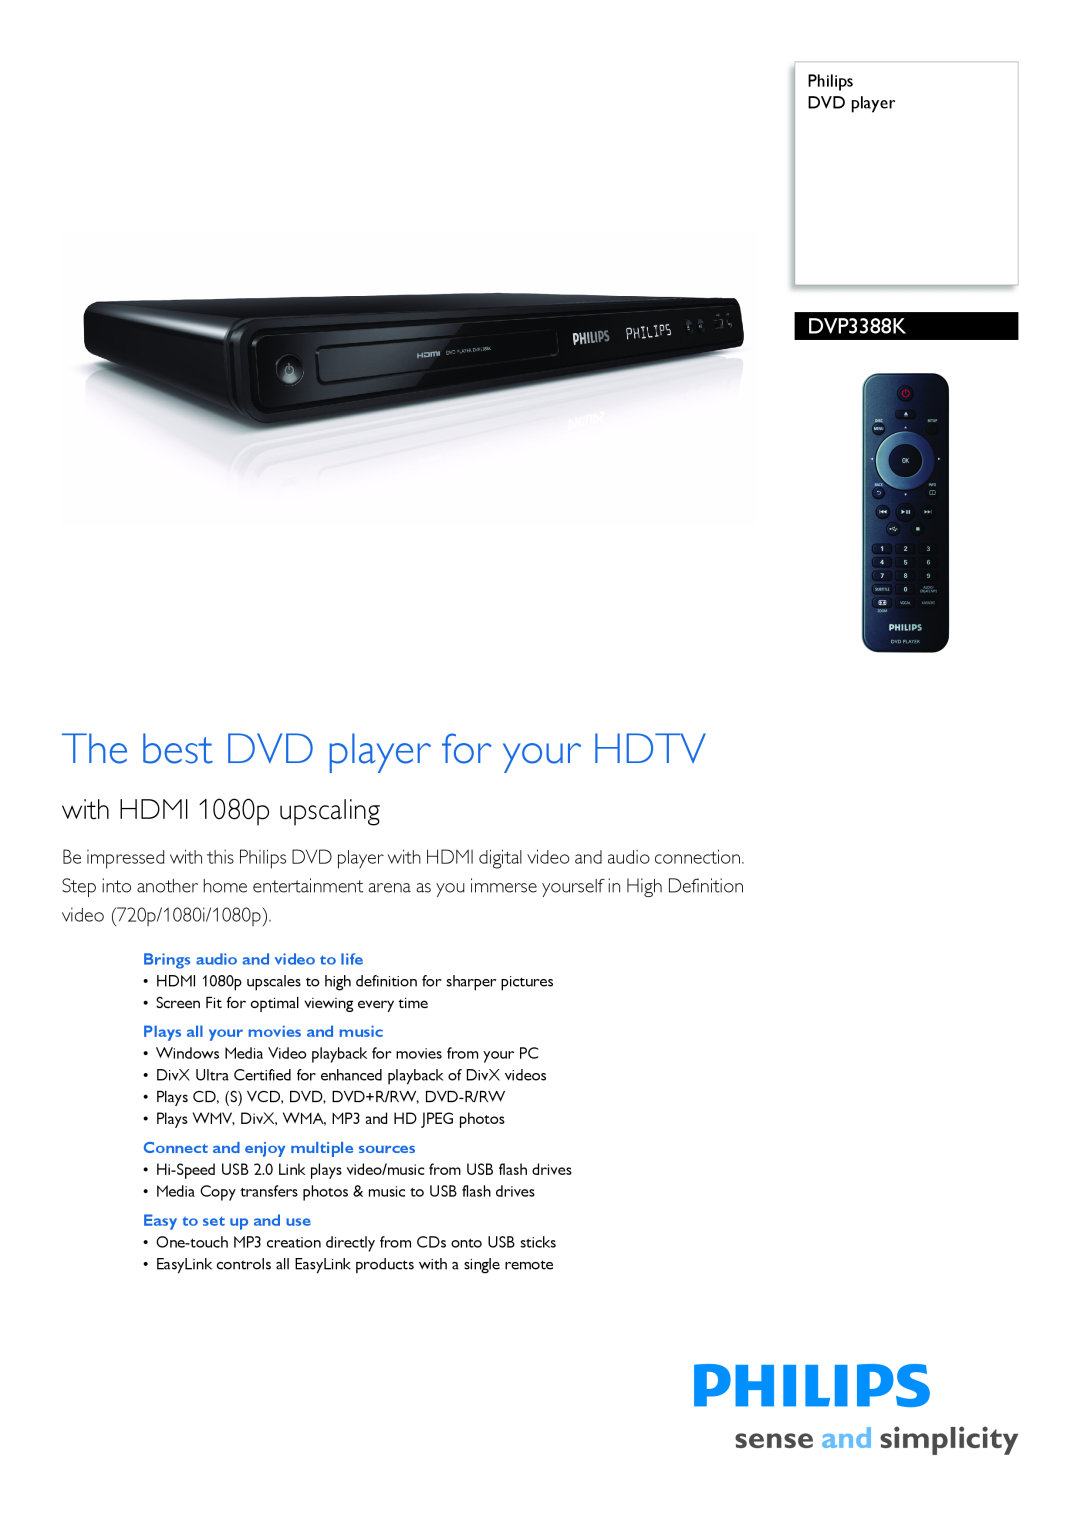 Philips DVP3388K/98 manual Philips DVD player, Brings audio and video to life, Plays all your movies and music 